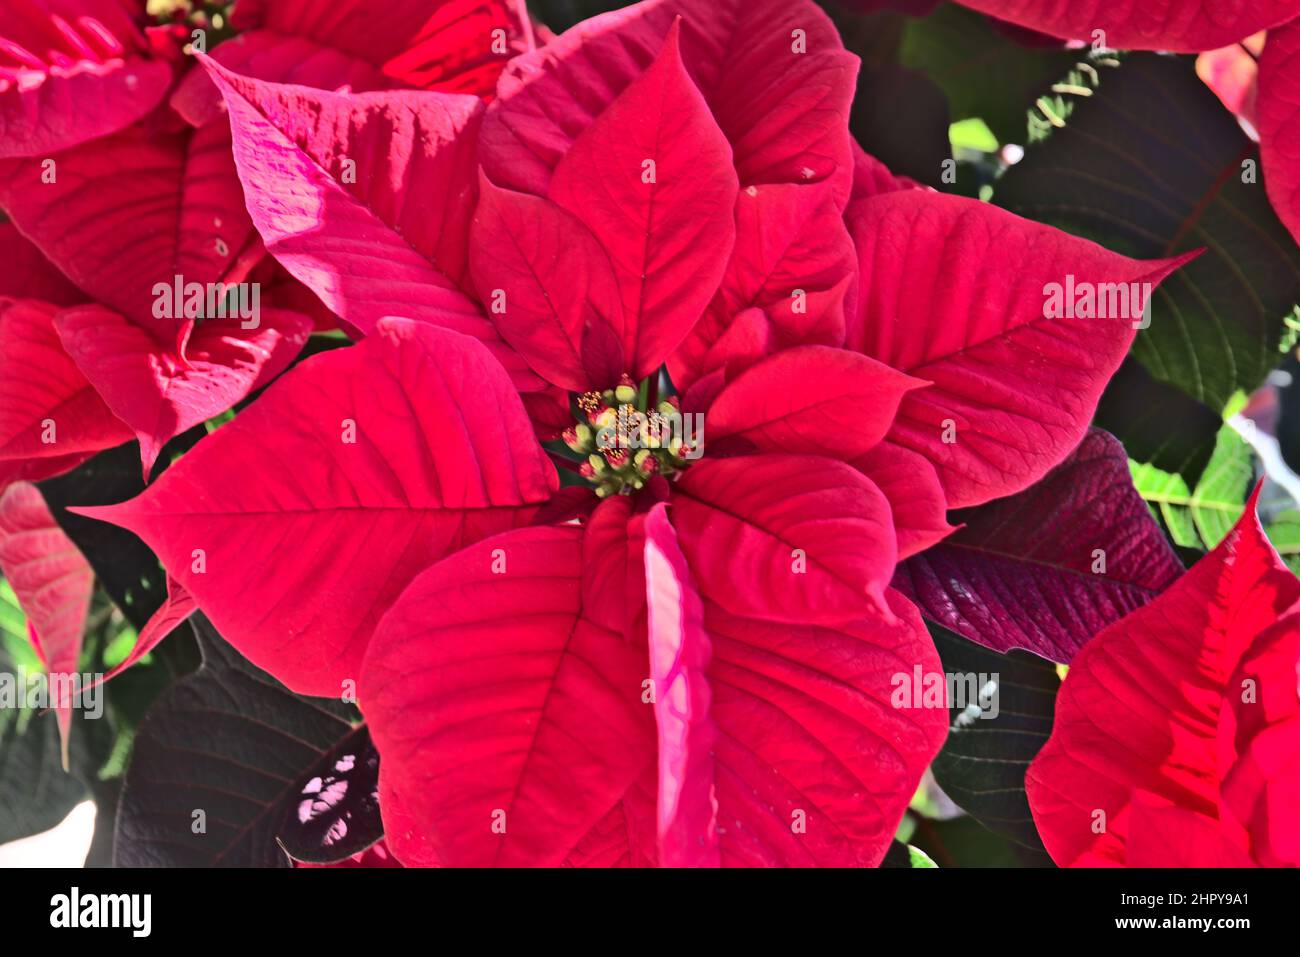 Red christmas star plant Stock Photo